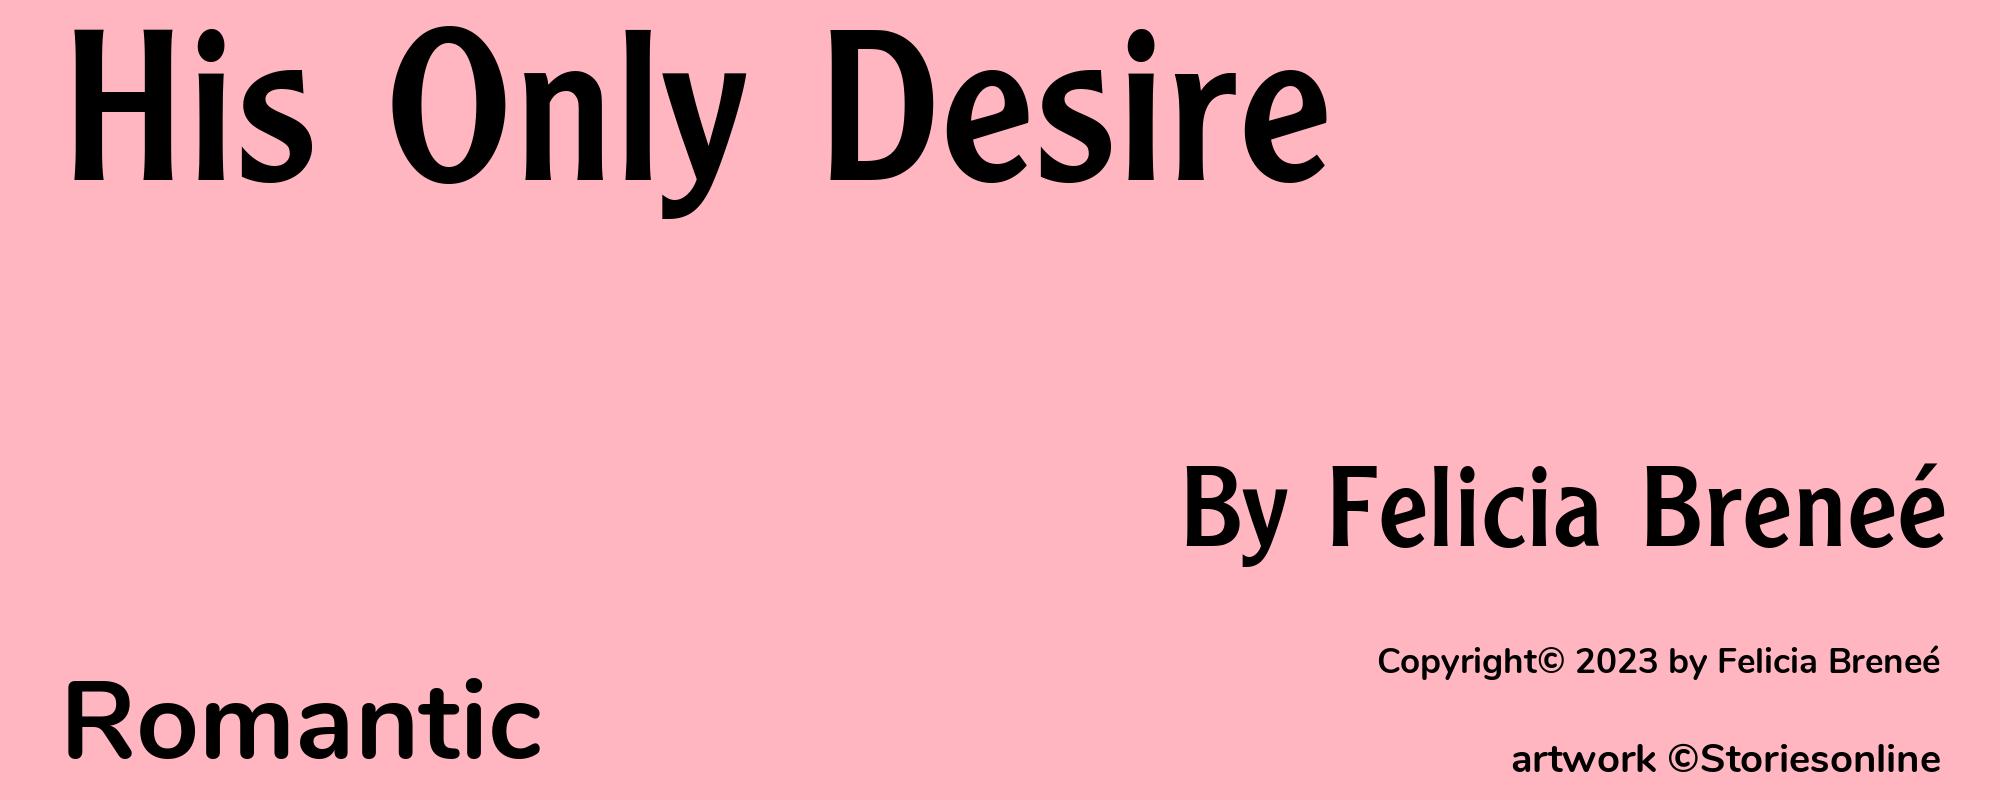 His Only Desire - Cover